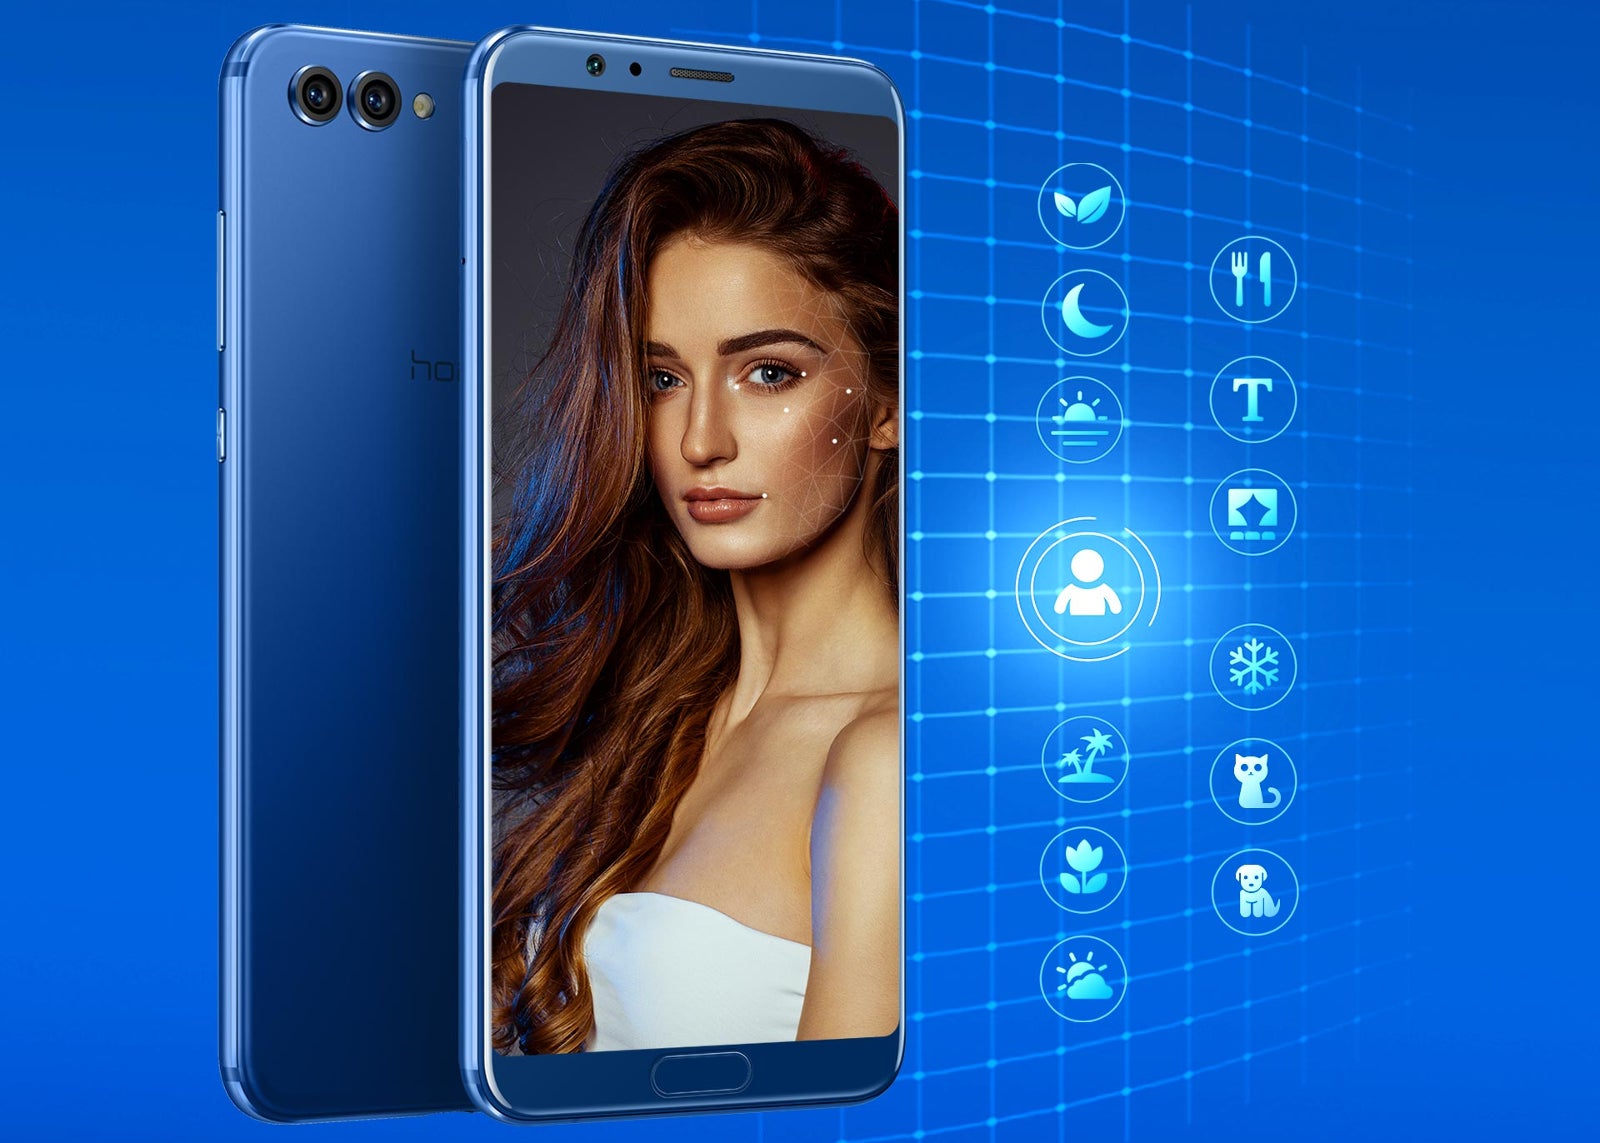 Honor launches "your first AI phone": the Honor View 10